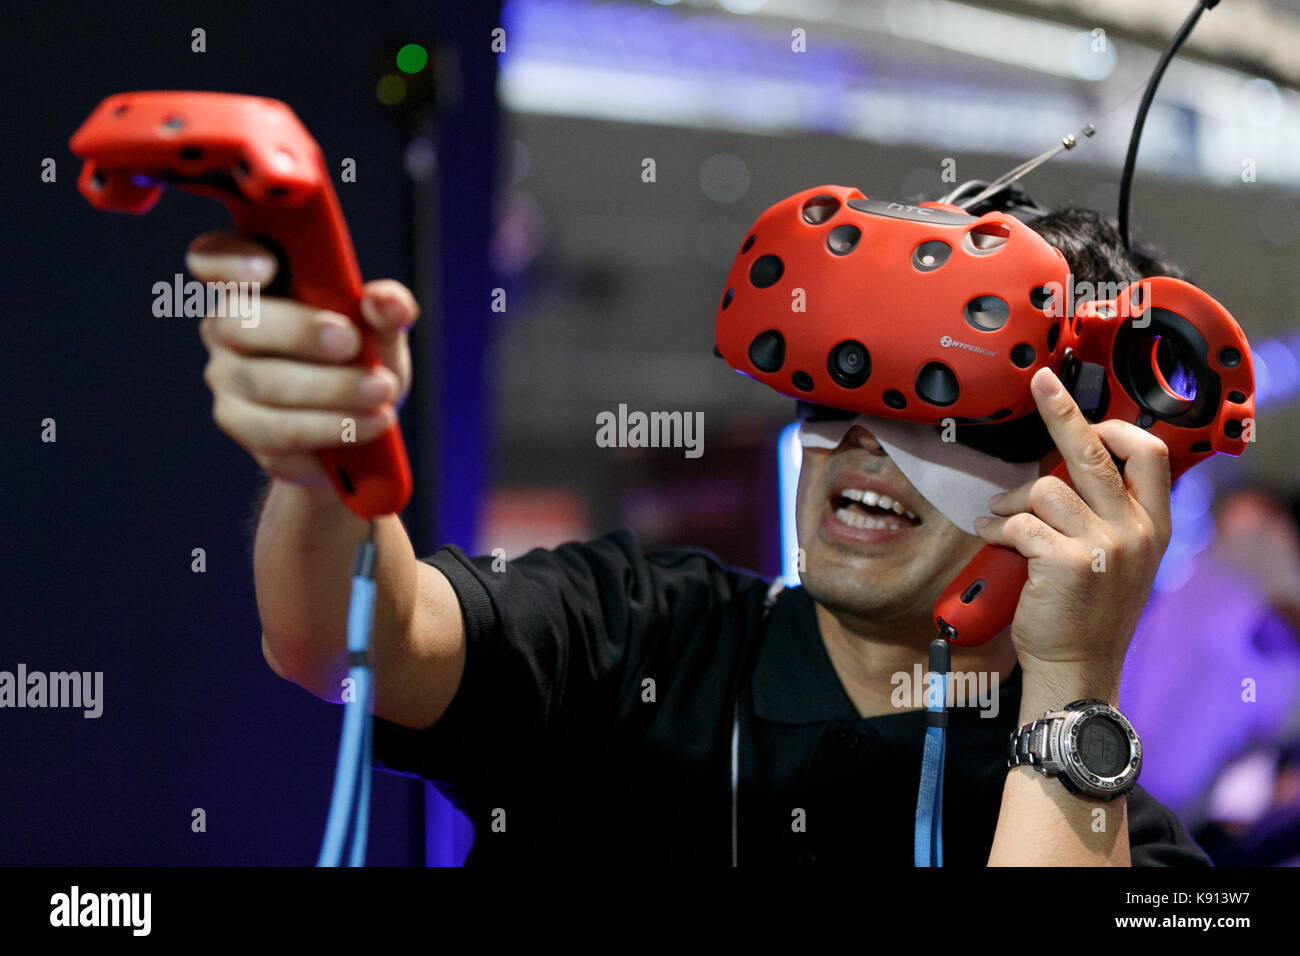 Chiba, Japan. 21st Sep, 2017. A man tests a virtual reality glasses at the Tokyo Game Show (TGS 2017) on September 21, 2017, Chiba, Japan. This year's event hosts 609 companies from 36 different countries, introducing 1,317 video game titles for smartphones, games consoles, VR, AR and MR platforms. The show, which expects to attract 250,000 visitors, runs until September 24 at the International Convention Complex Makuhari Messe in Chiba; and will be streamed live around the world. Credit: Rodrigo Reyes Marin/AFLO/Alamy Live News Stock Photo